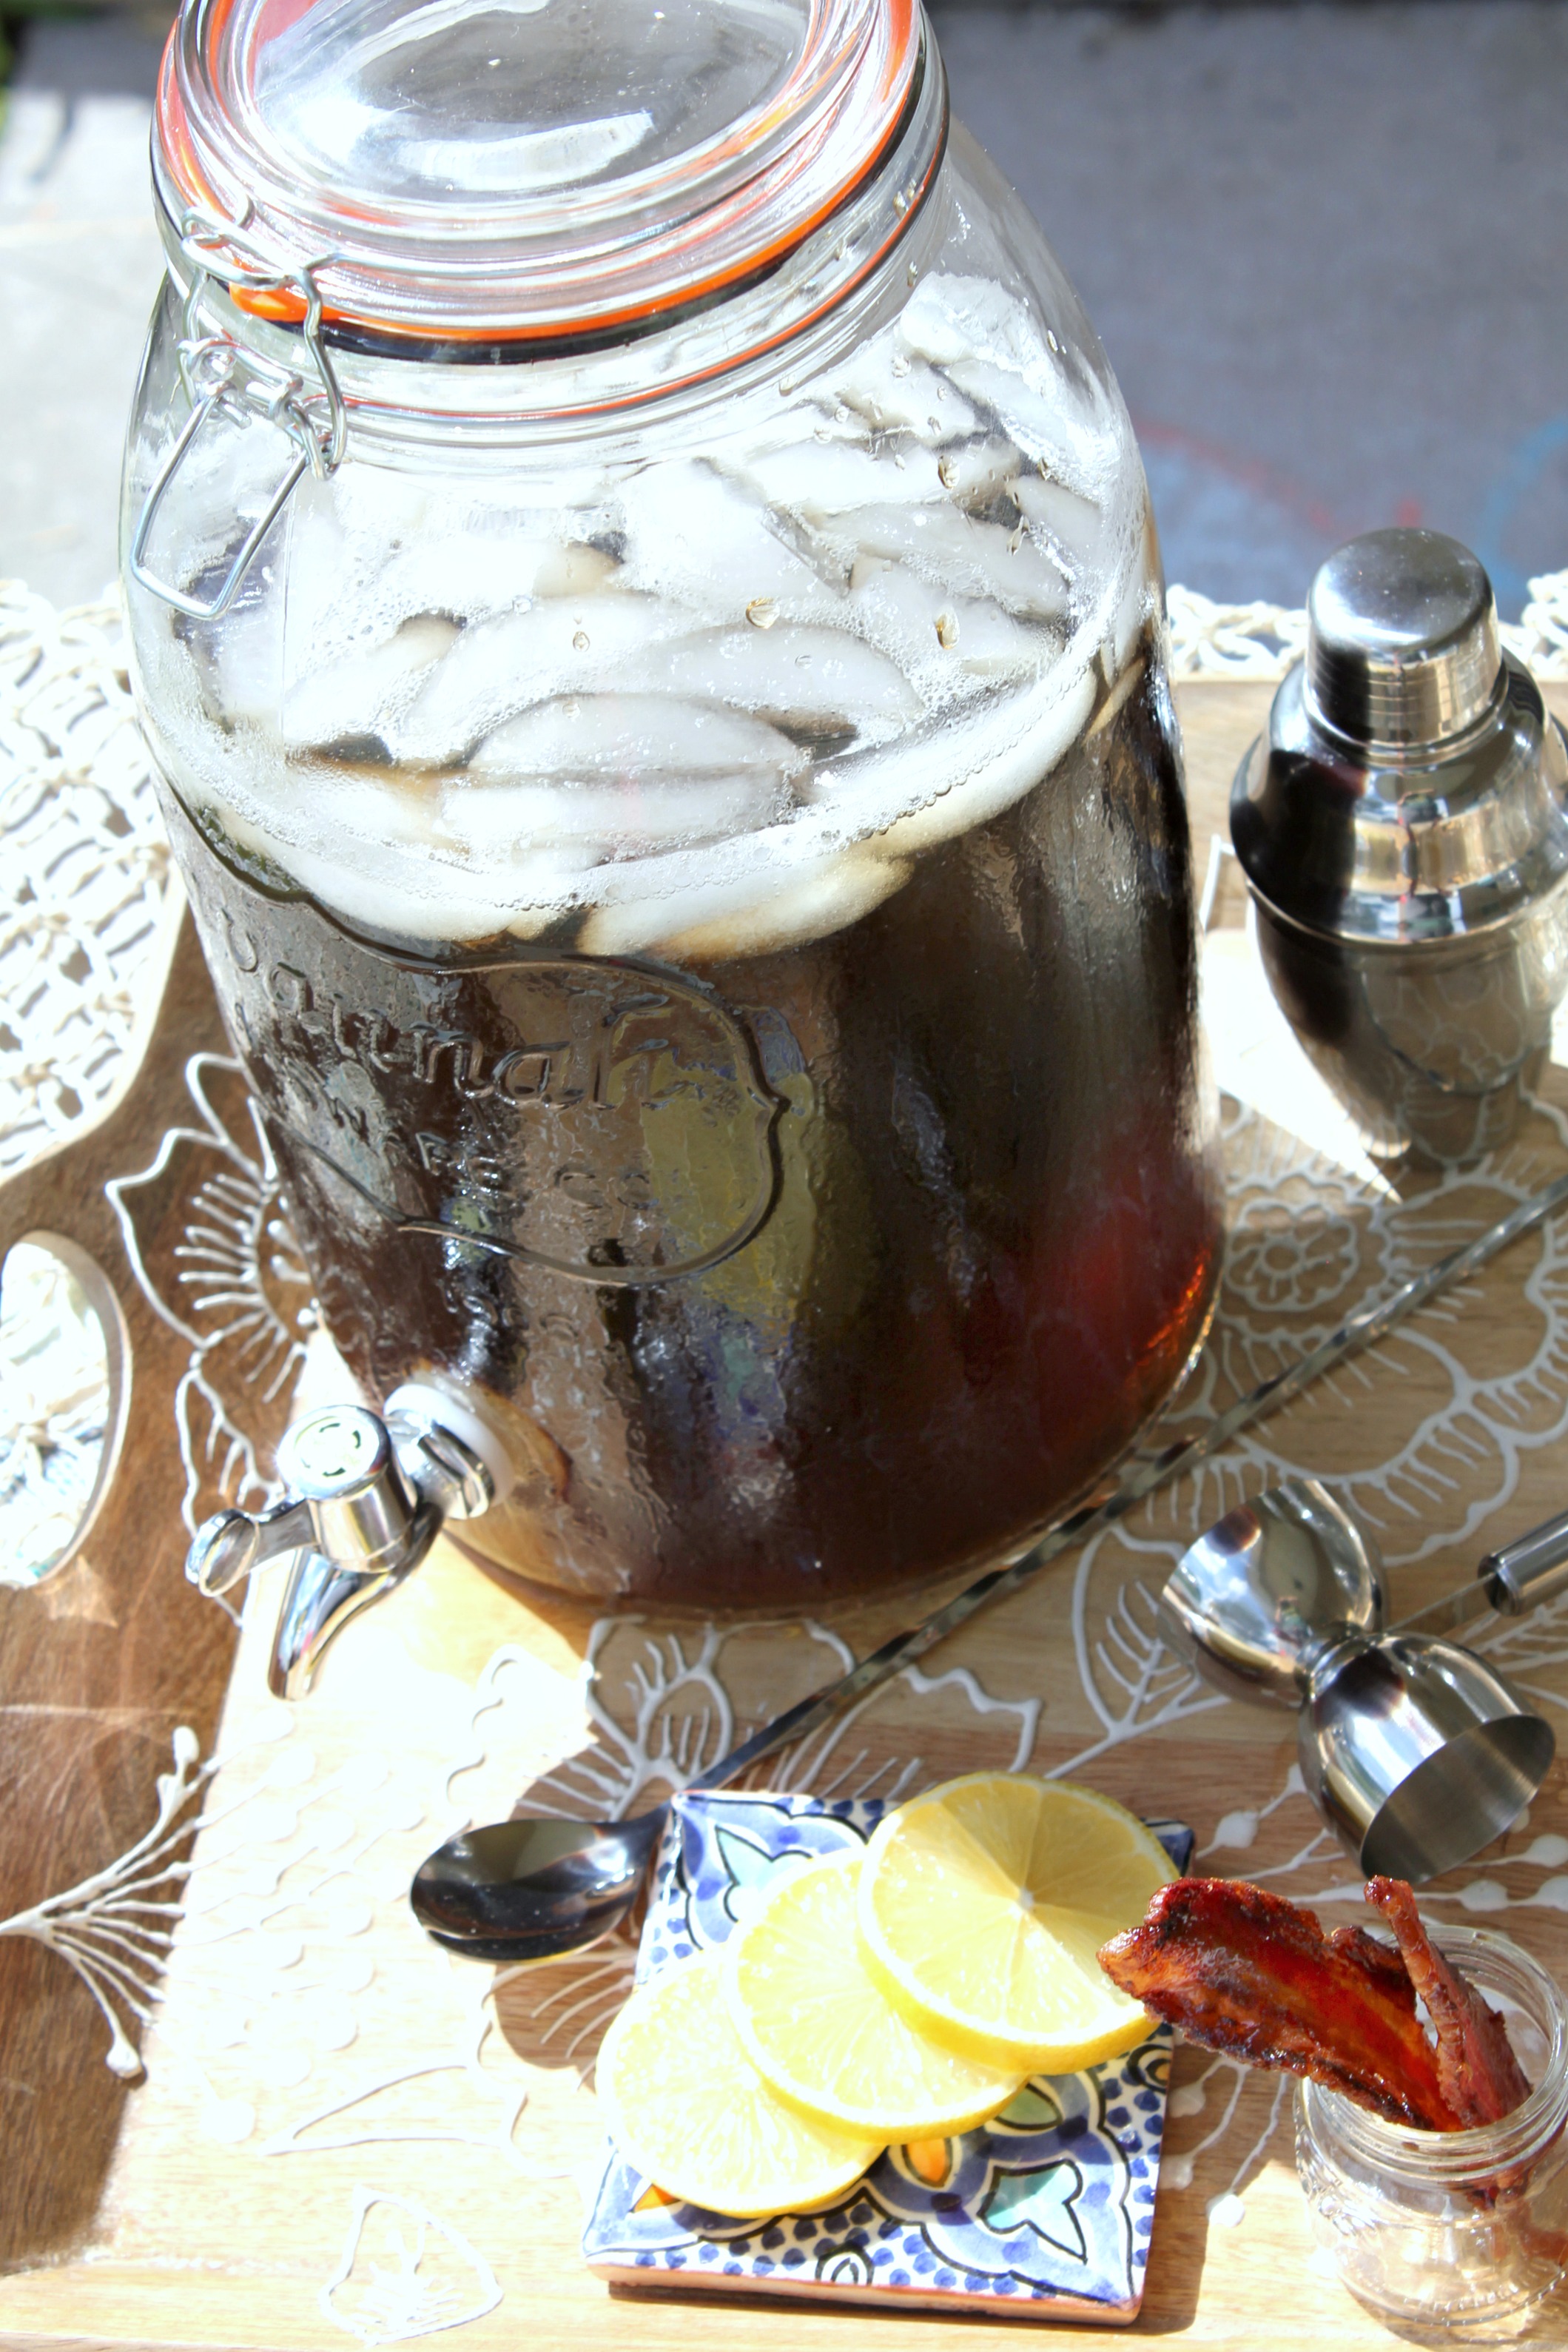 Texas Tea is the perfect drink for the 50th Annual CMA's